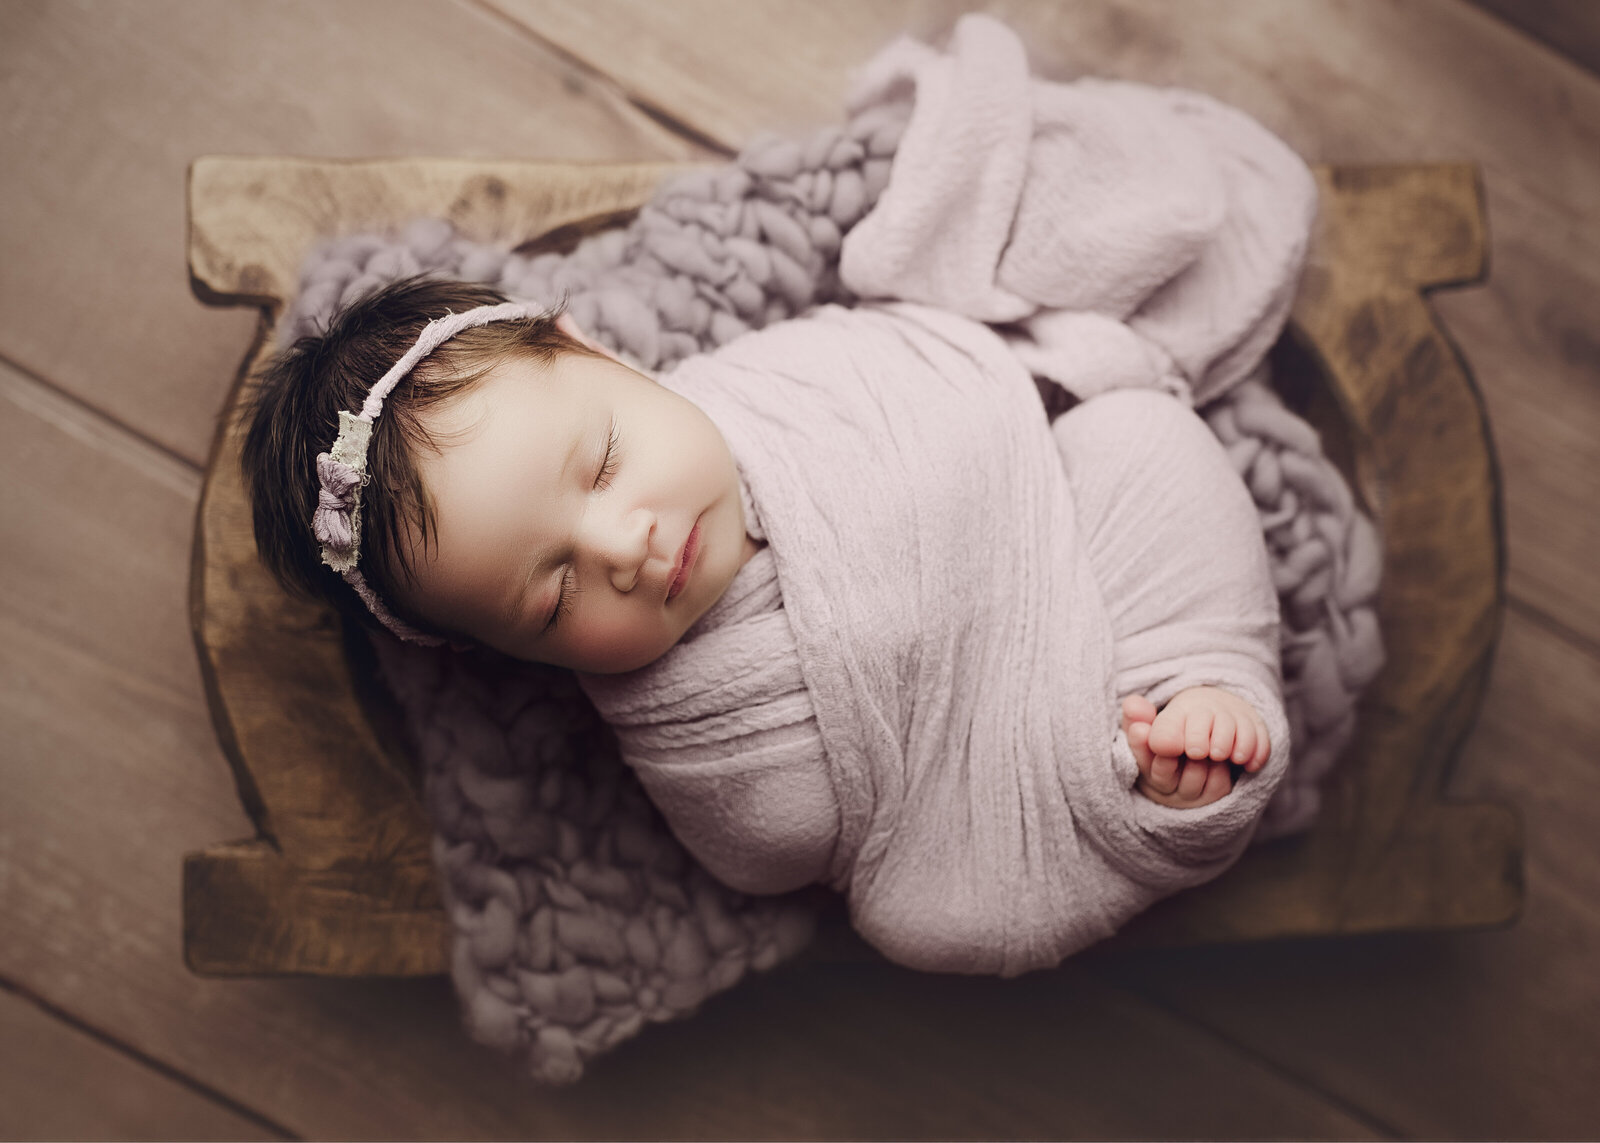 so perfectly wrapped and sleeping peacefully in purple. her little toes sticking out. Blueberry and lace photography